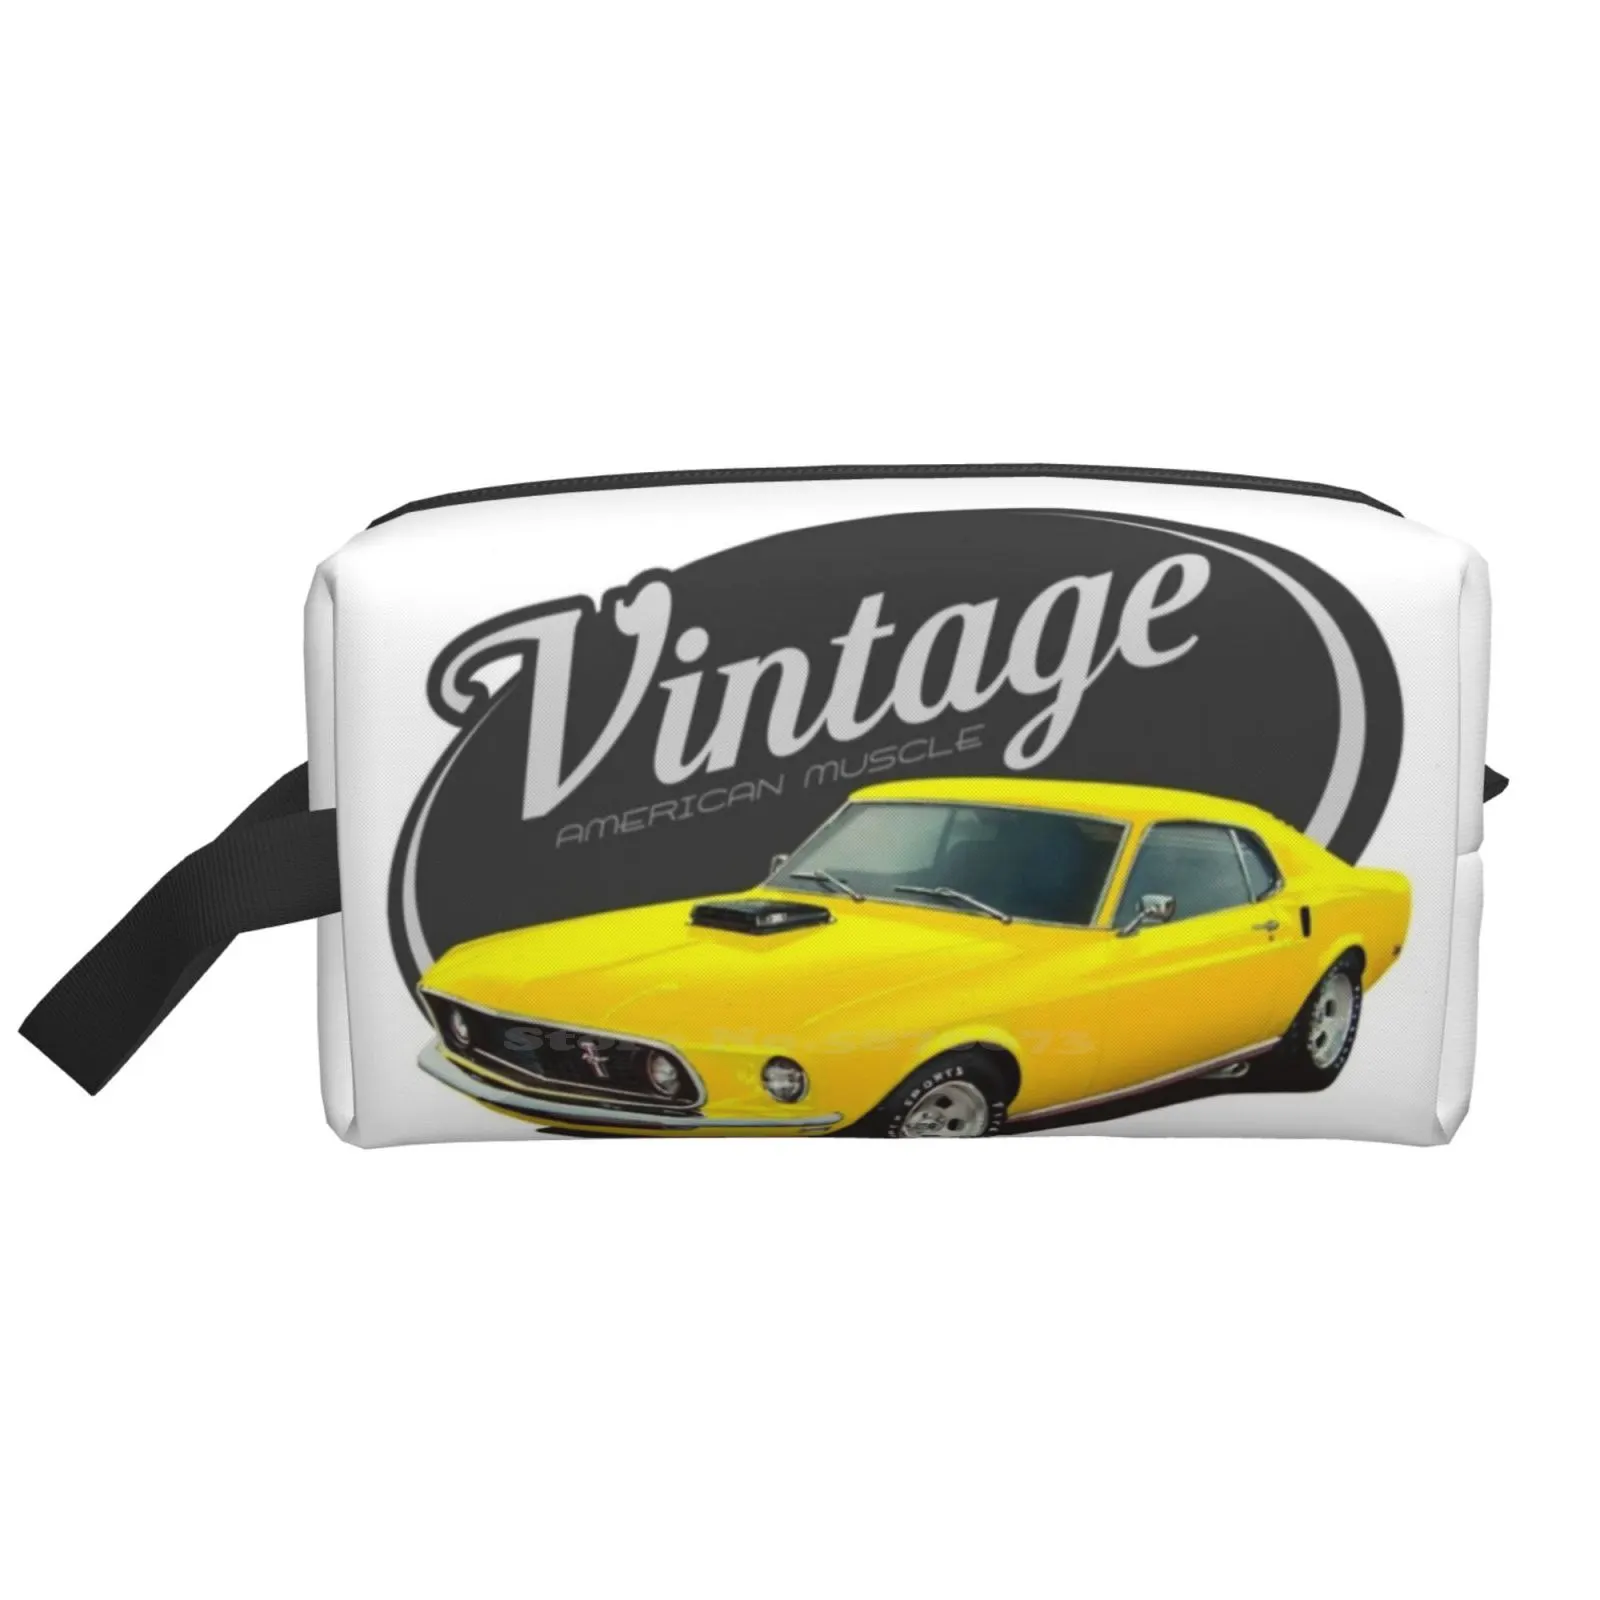 

Vintage Yellow Mustang Portable Storage Bag Bathroom Travel Large Size Vintage Retro Old Classic Car Gt 1969 69 Yellow Muscle